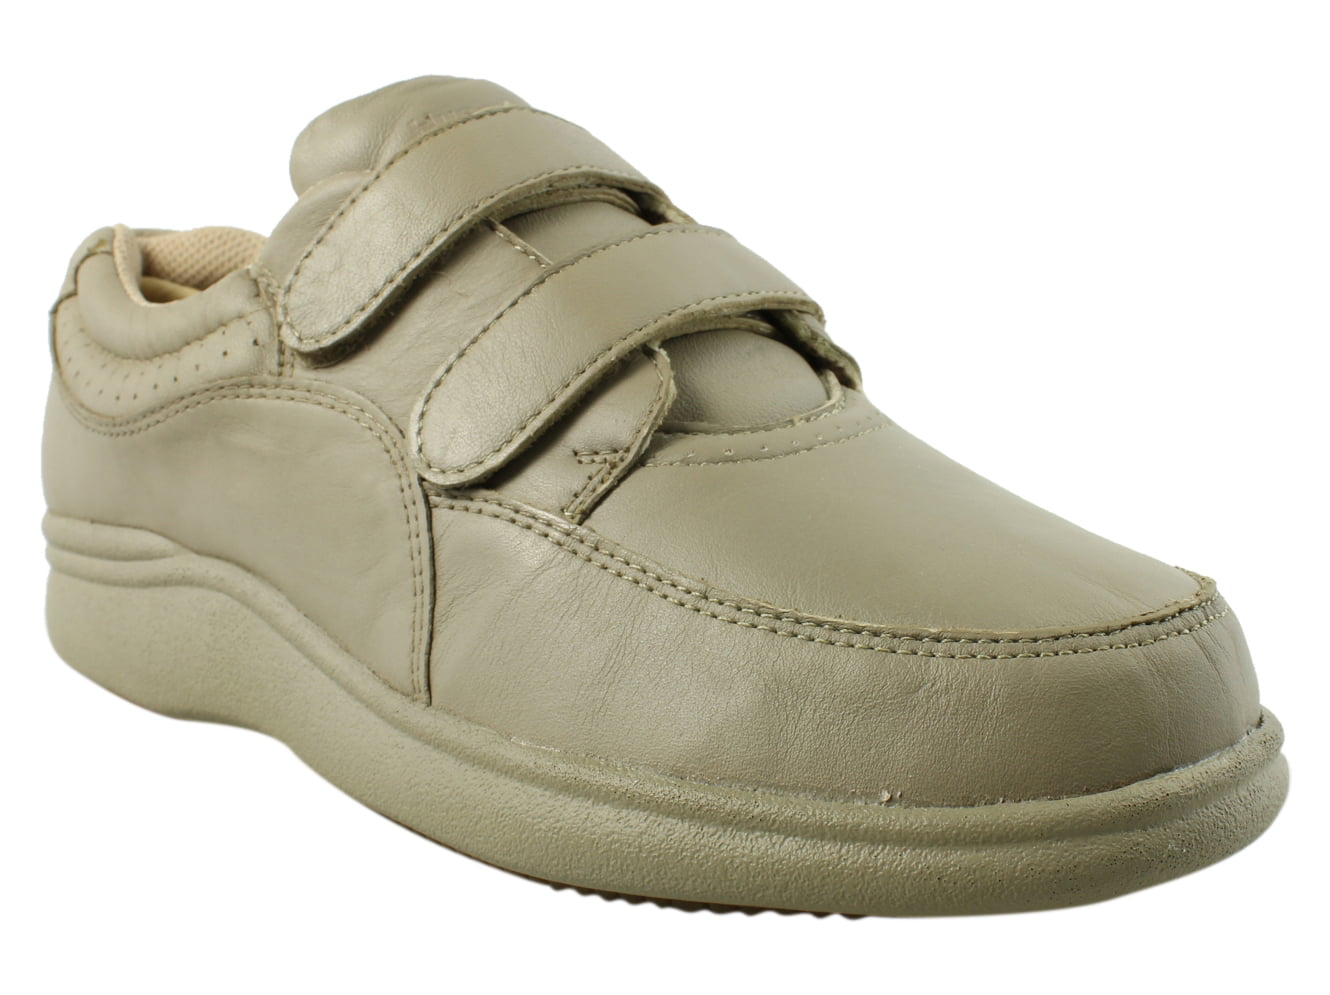 New Hush Puppies Womens H70295 TaupeLeather Walking Shoes Size 7 ...